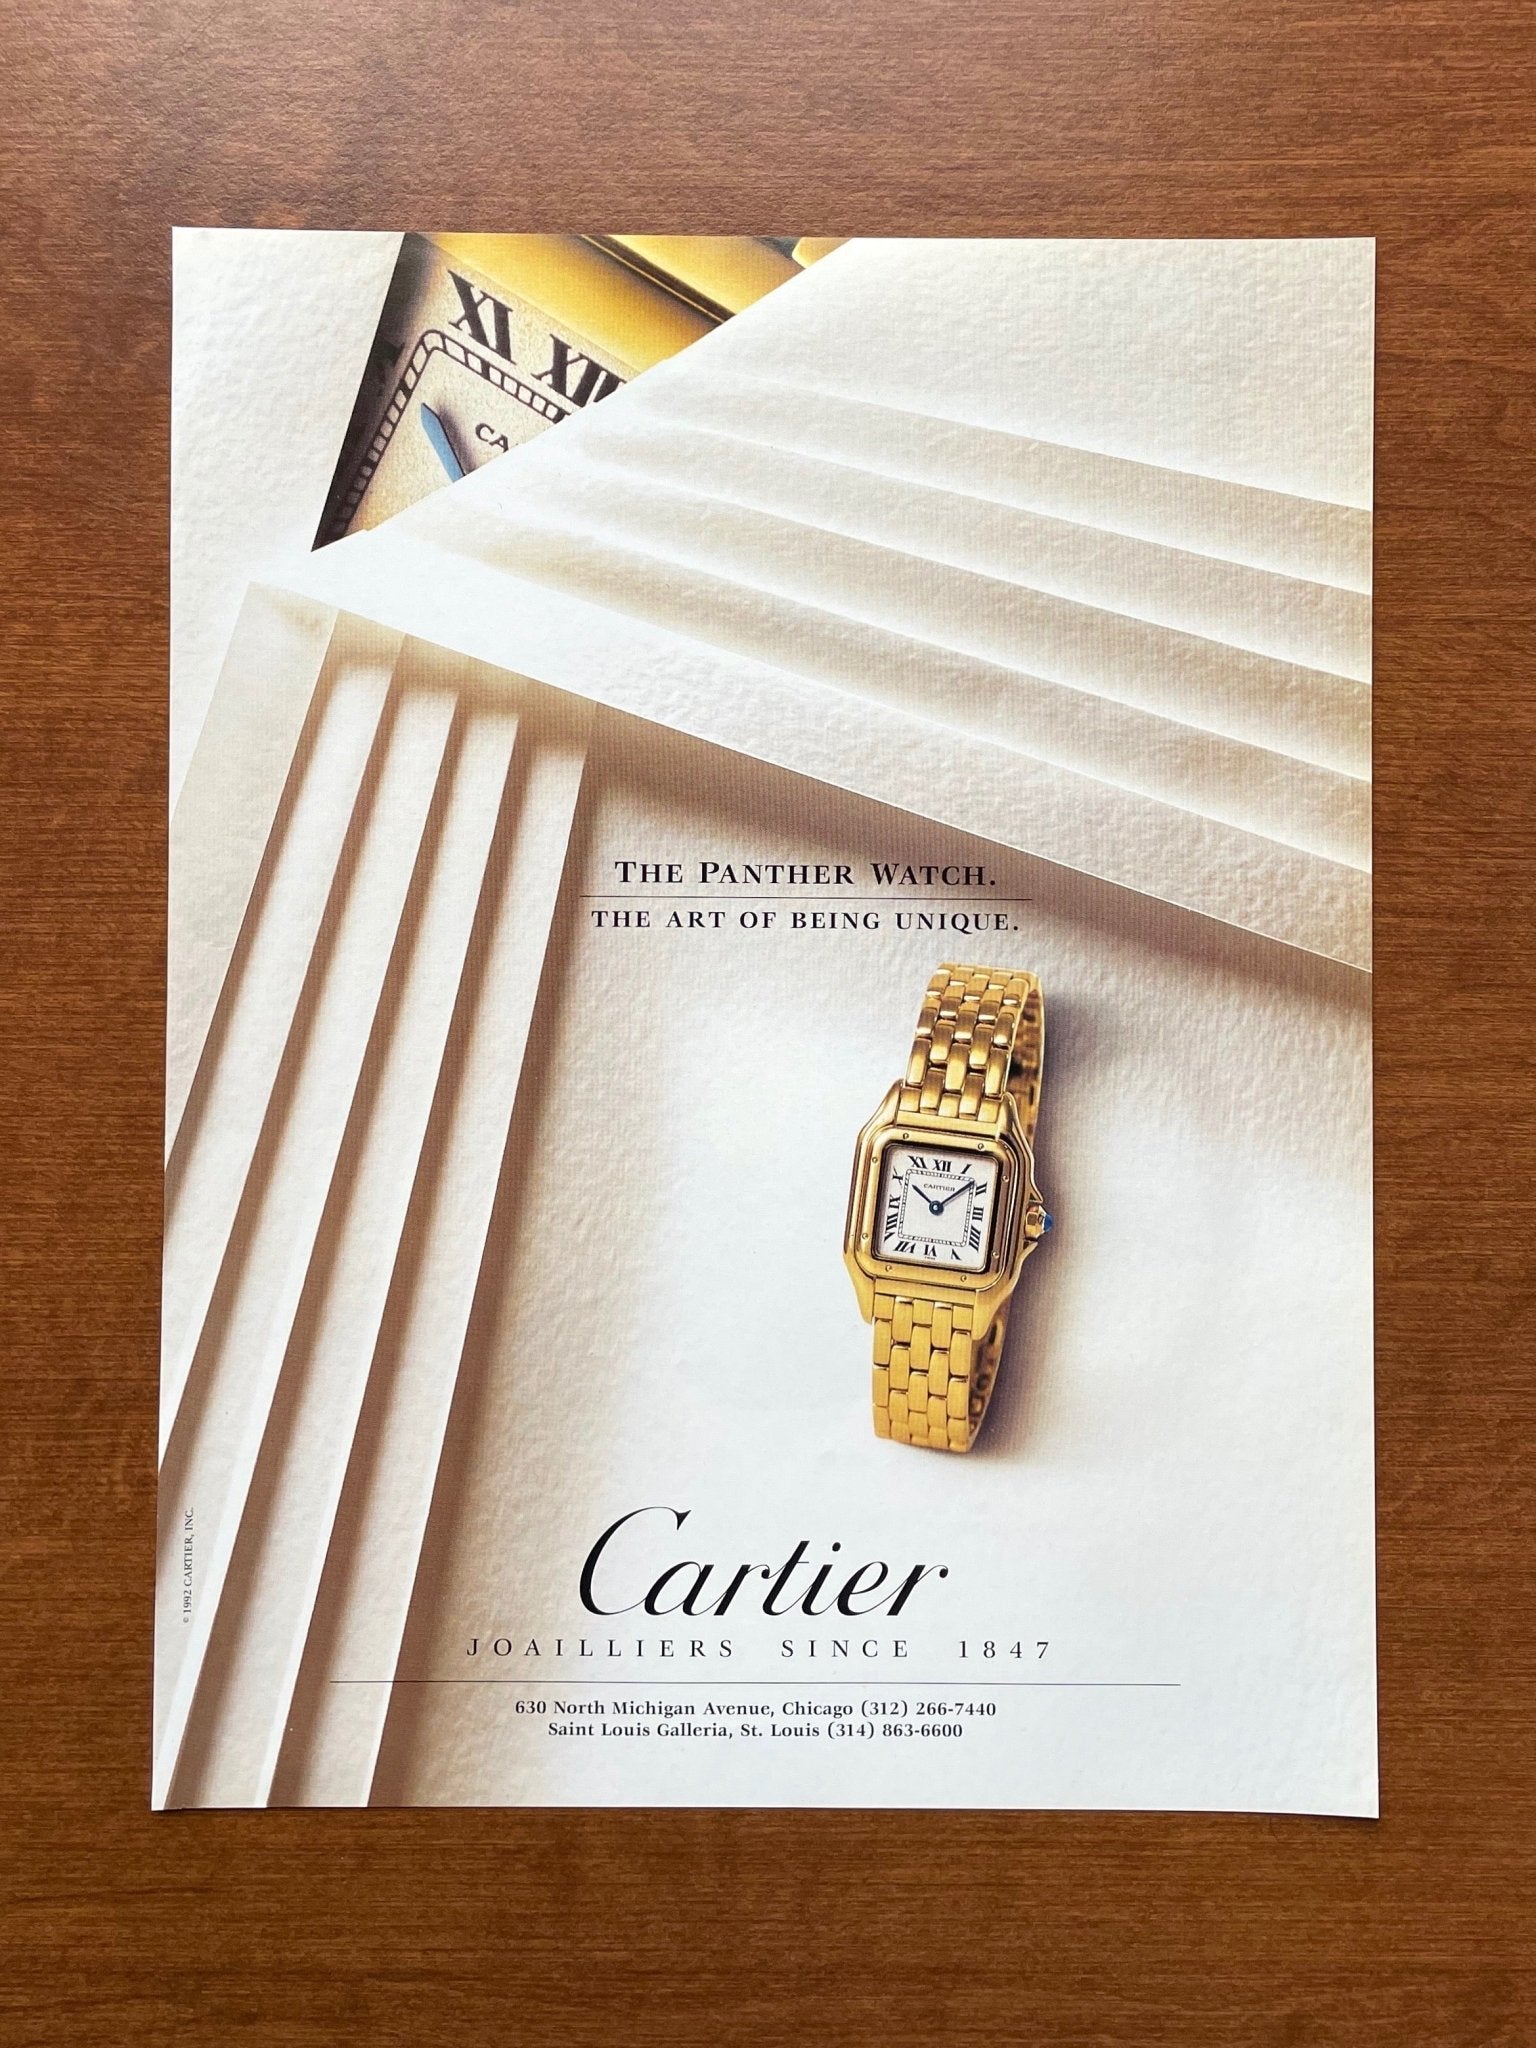 Cartier Panther Watch "Art of Being Unique" Advertisement